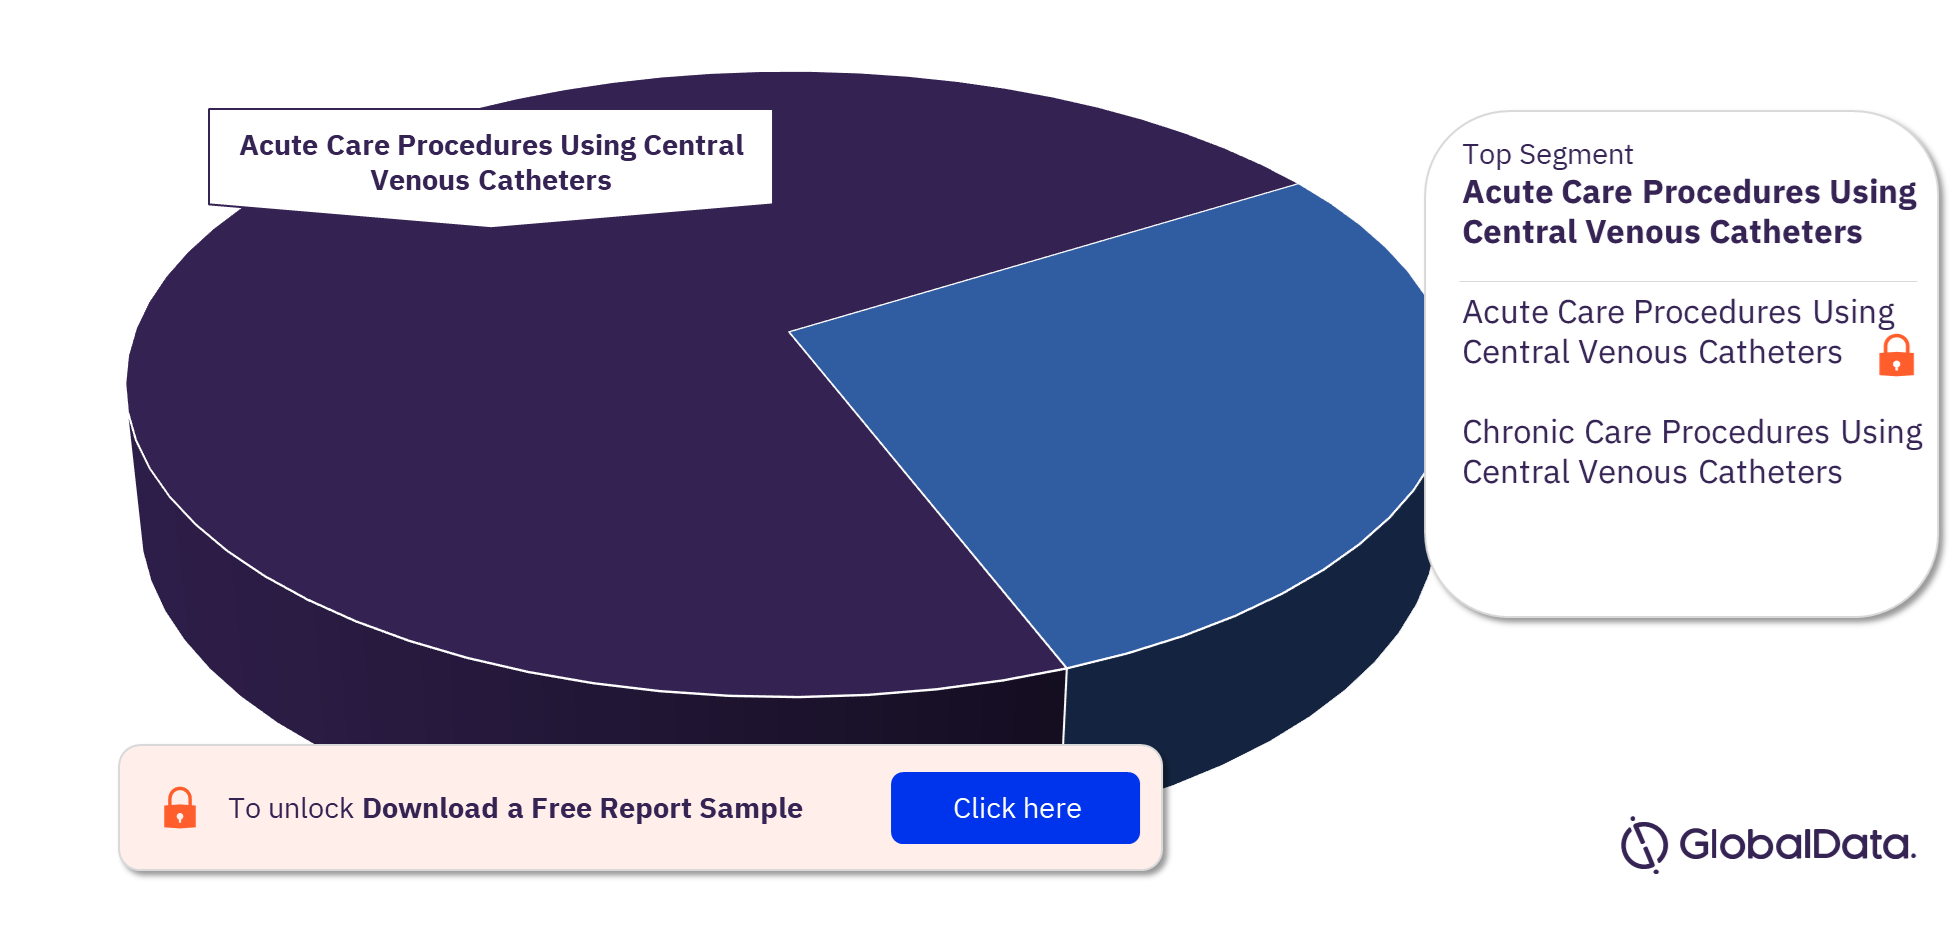 APAC Procedures using Central Venous Catheters Market Analysis by Segments, 2022 (%)